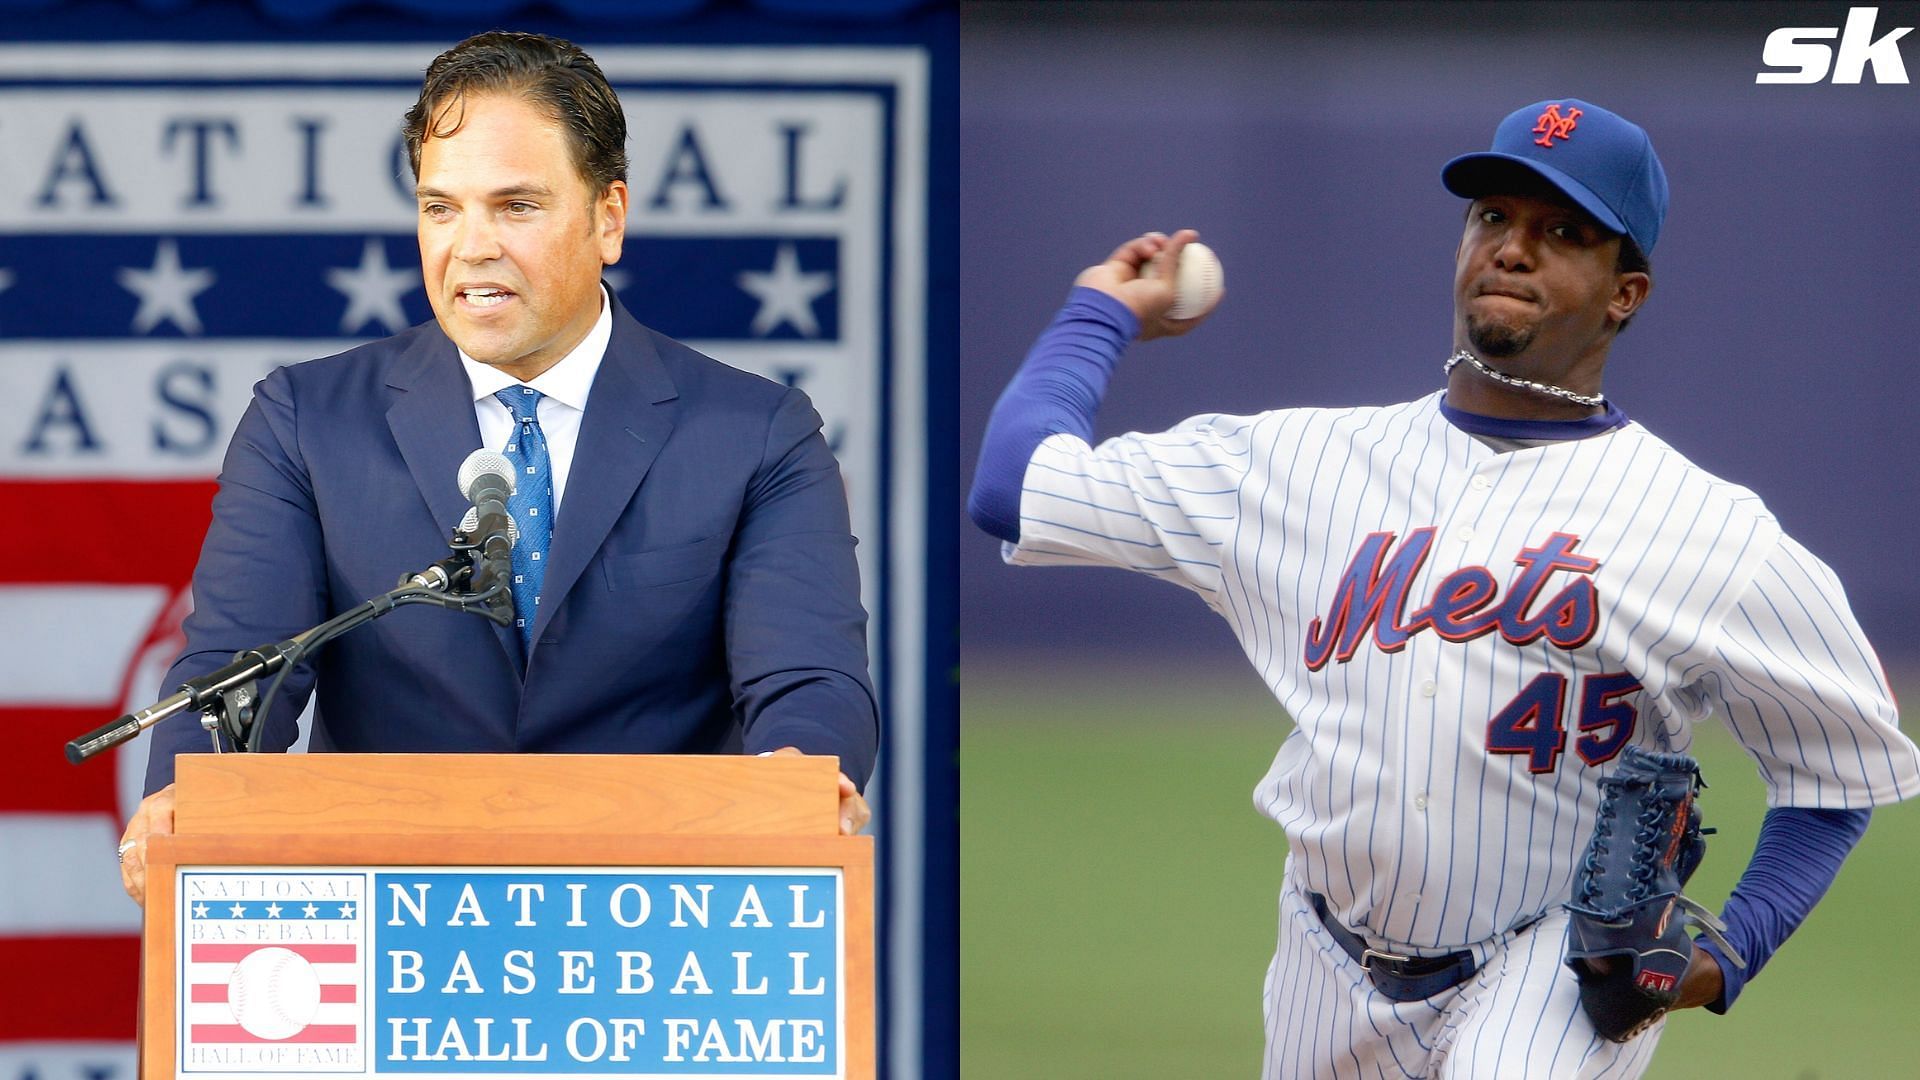 Mike Piazza will enter Hall of Fame with Mets' cap